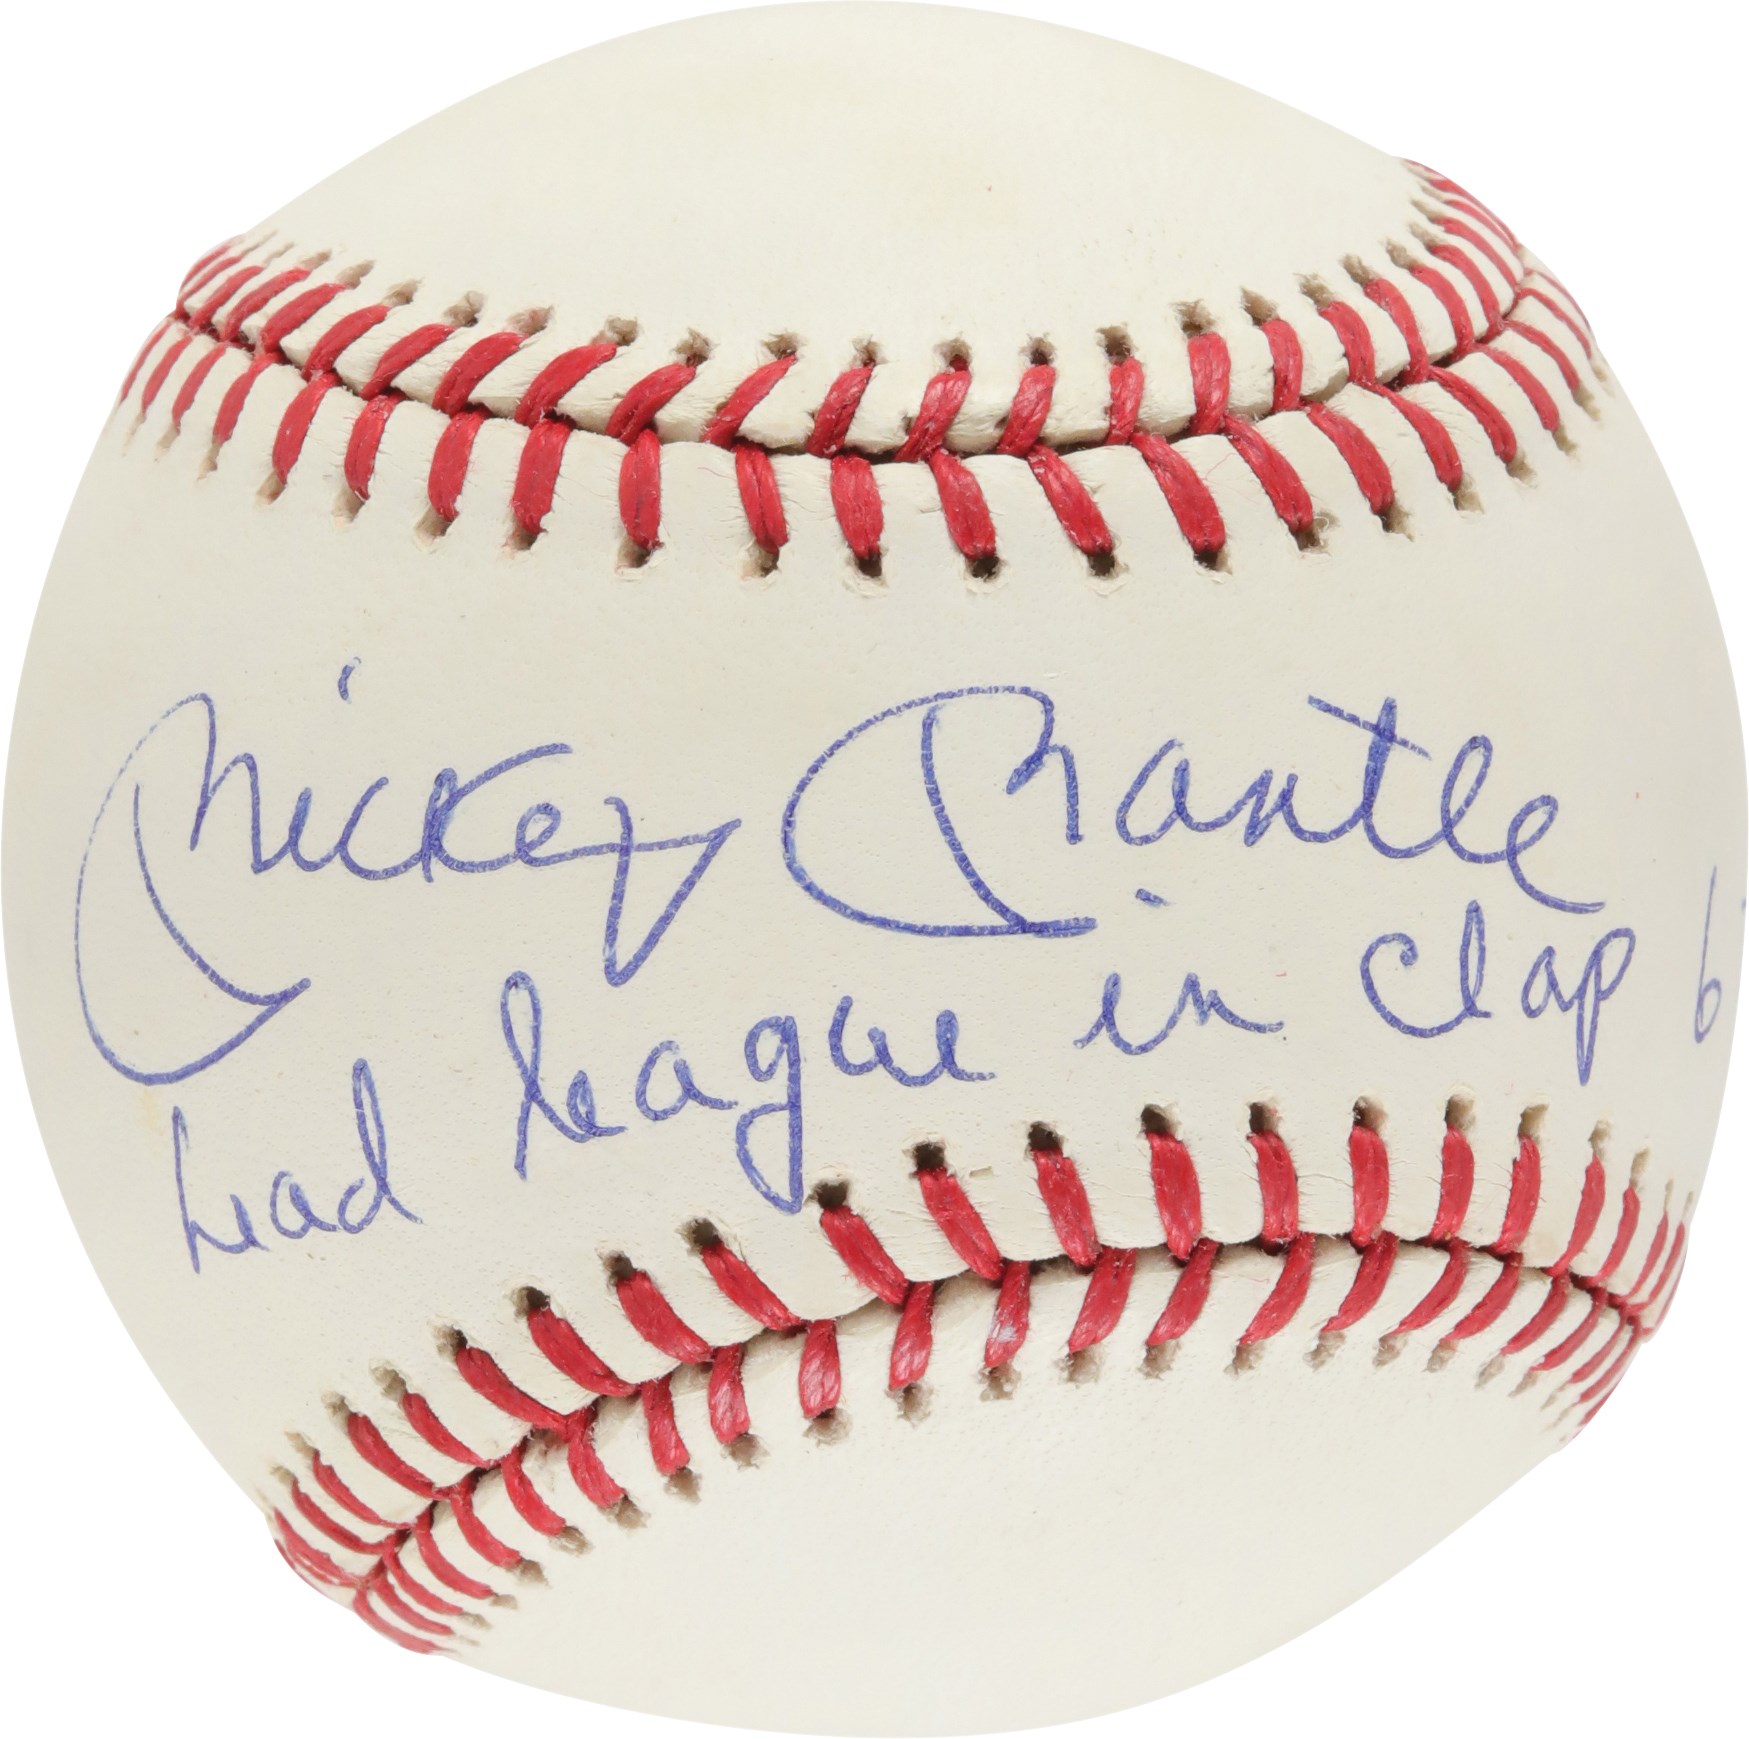 Mickey Mantle "Lead the League in Clap 6 Times" Single-Signed Ball (PSA)